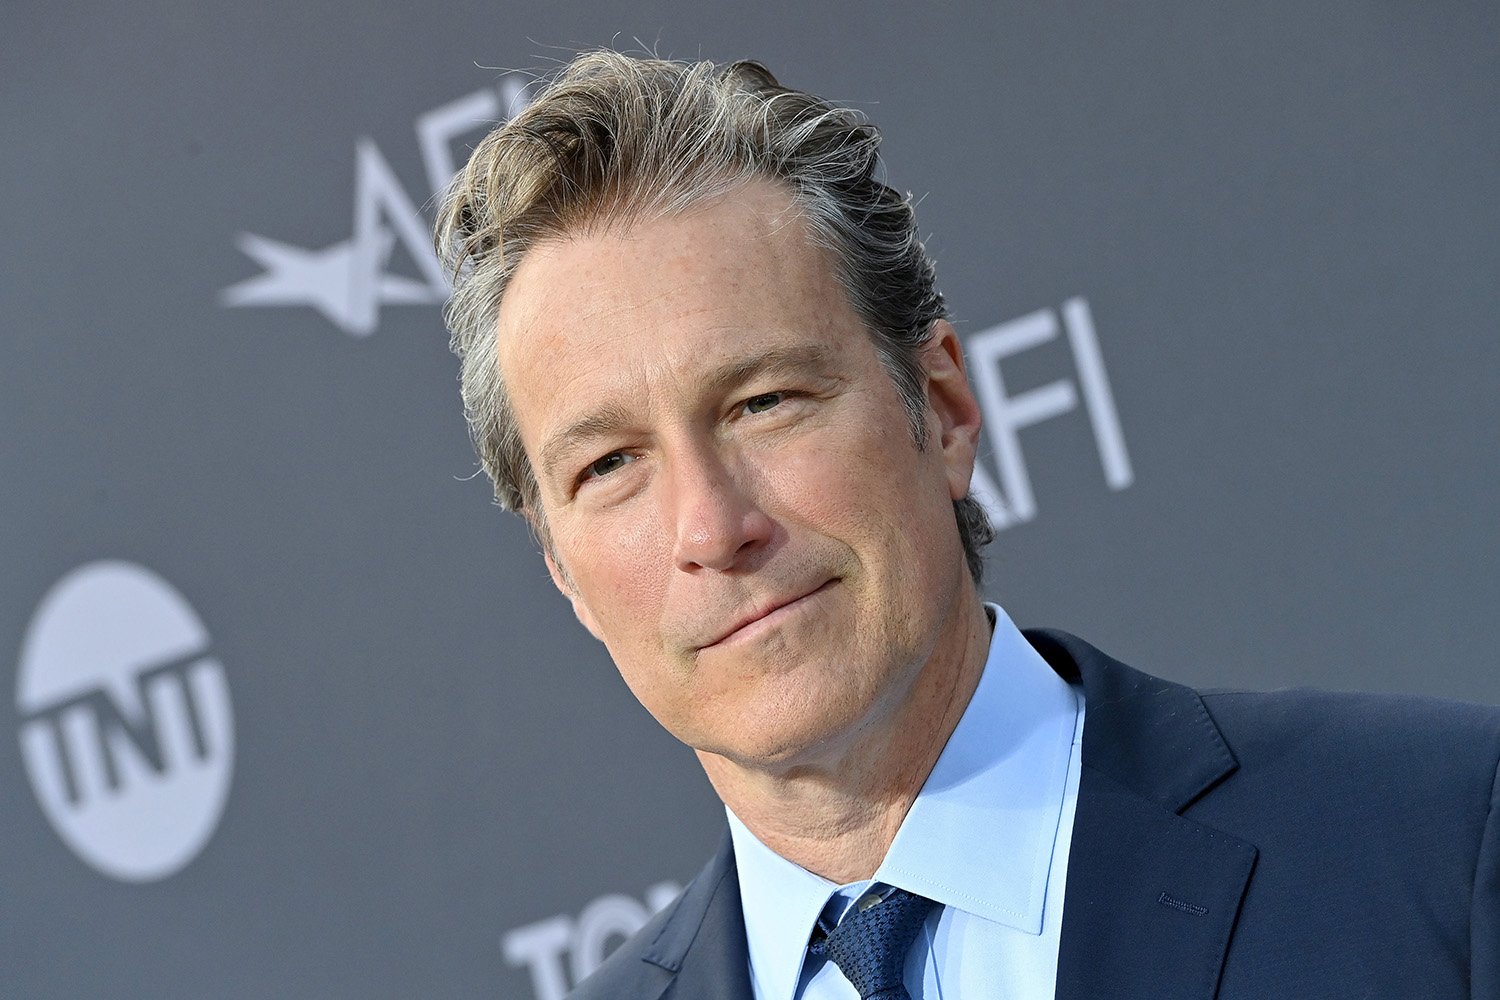 How I Met Your Father Season 2 star John Corbett poses for a photo at the 48th AFI Life Achievement Award Gala Tribute in 2022